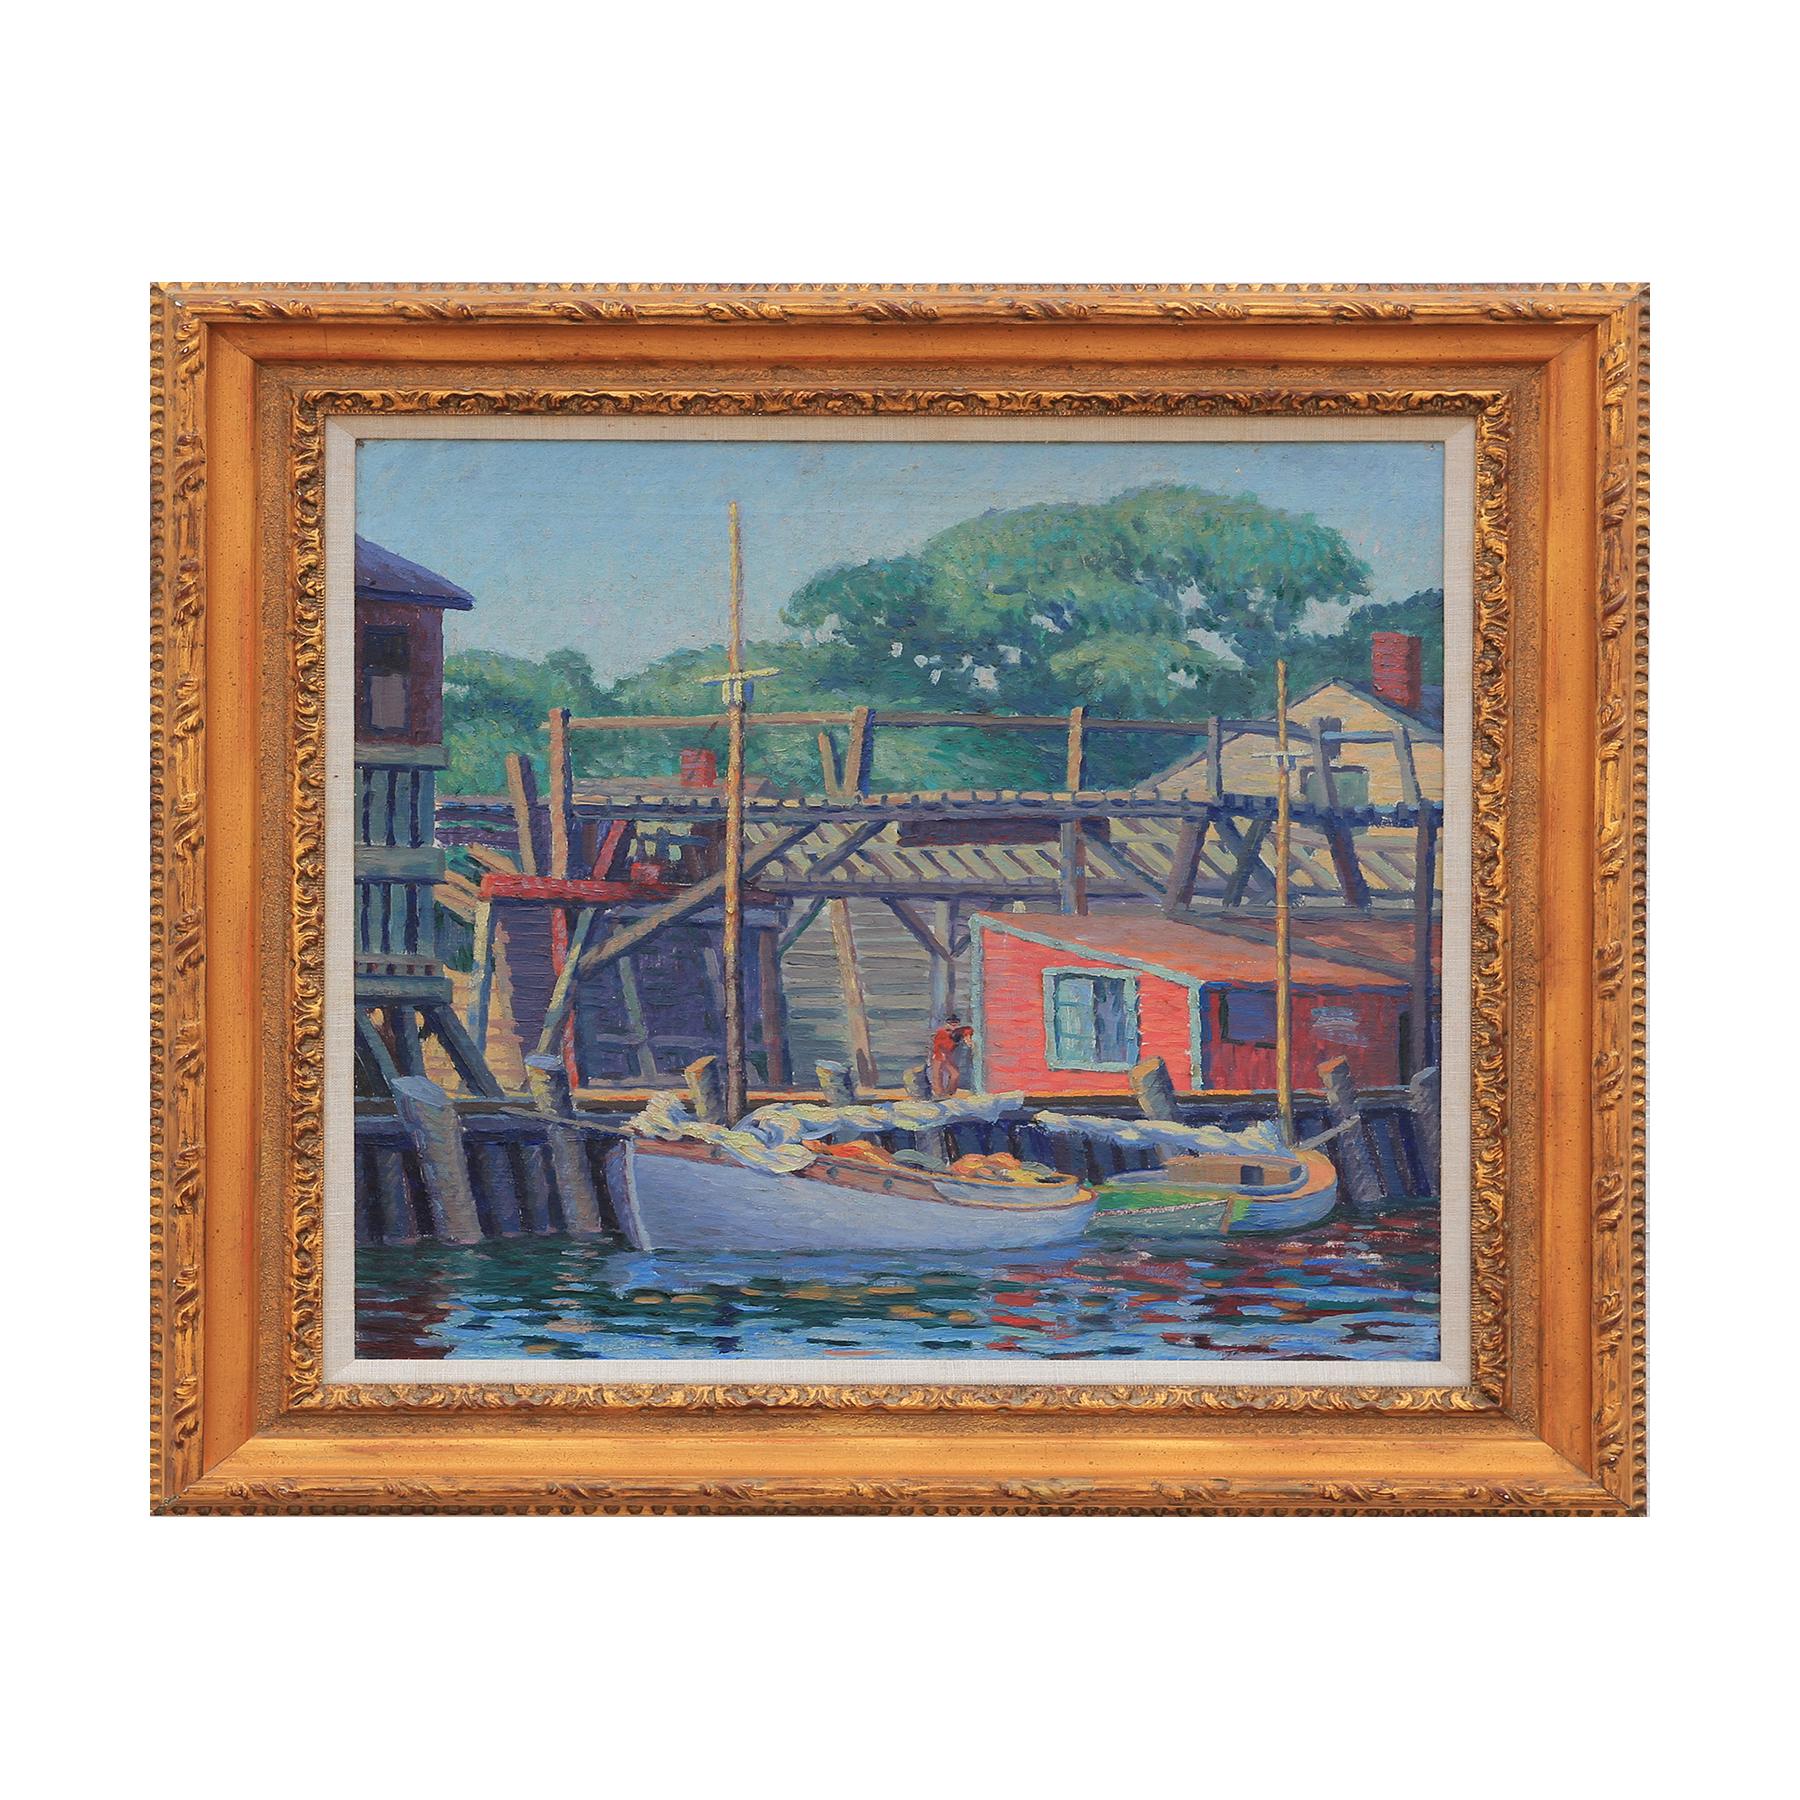 Harriet Randall Lumis Abstract Painting - "Gloucester Docks" Impressionist Boat Seascape